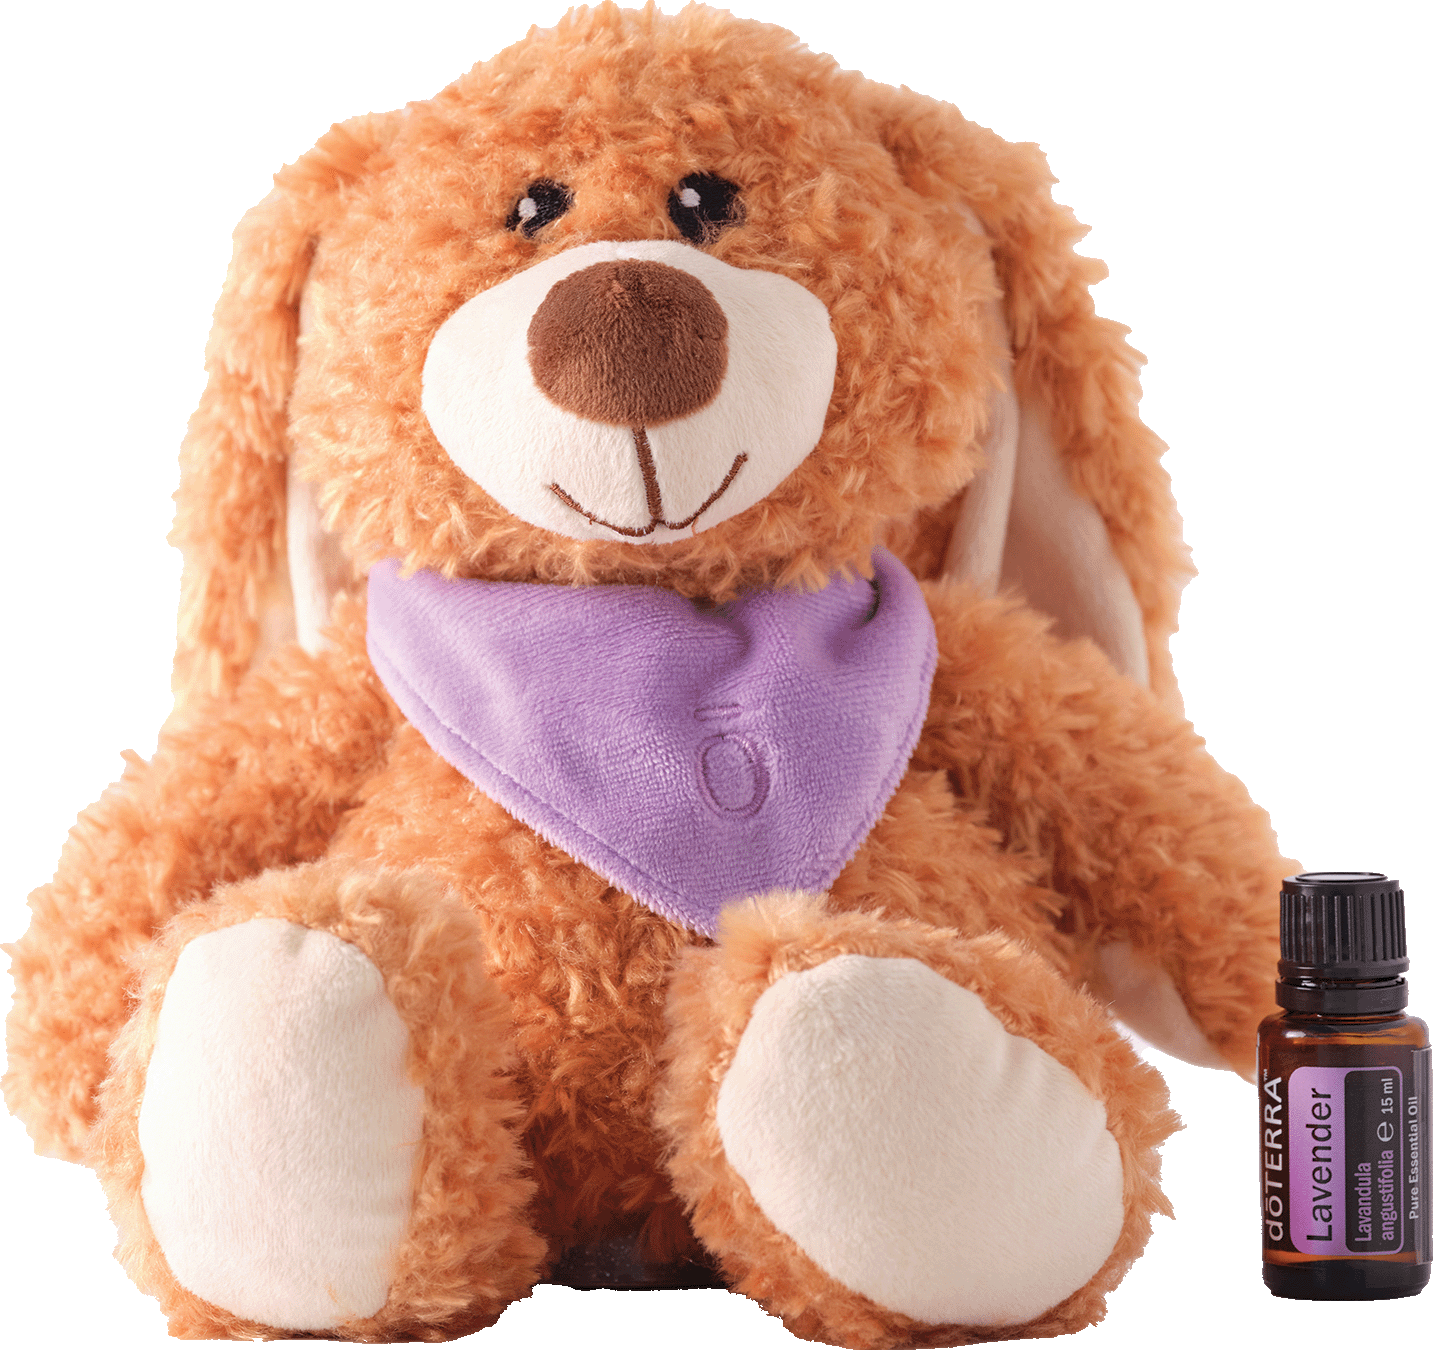 https://shop.doterra.com/custom/europe/images/products/special-offers/holiday/holiday-2022/wellie-bellies-warm-up-toy-w_-lavender-seasonal-large-1720x1350.png